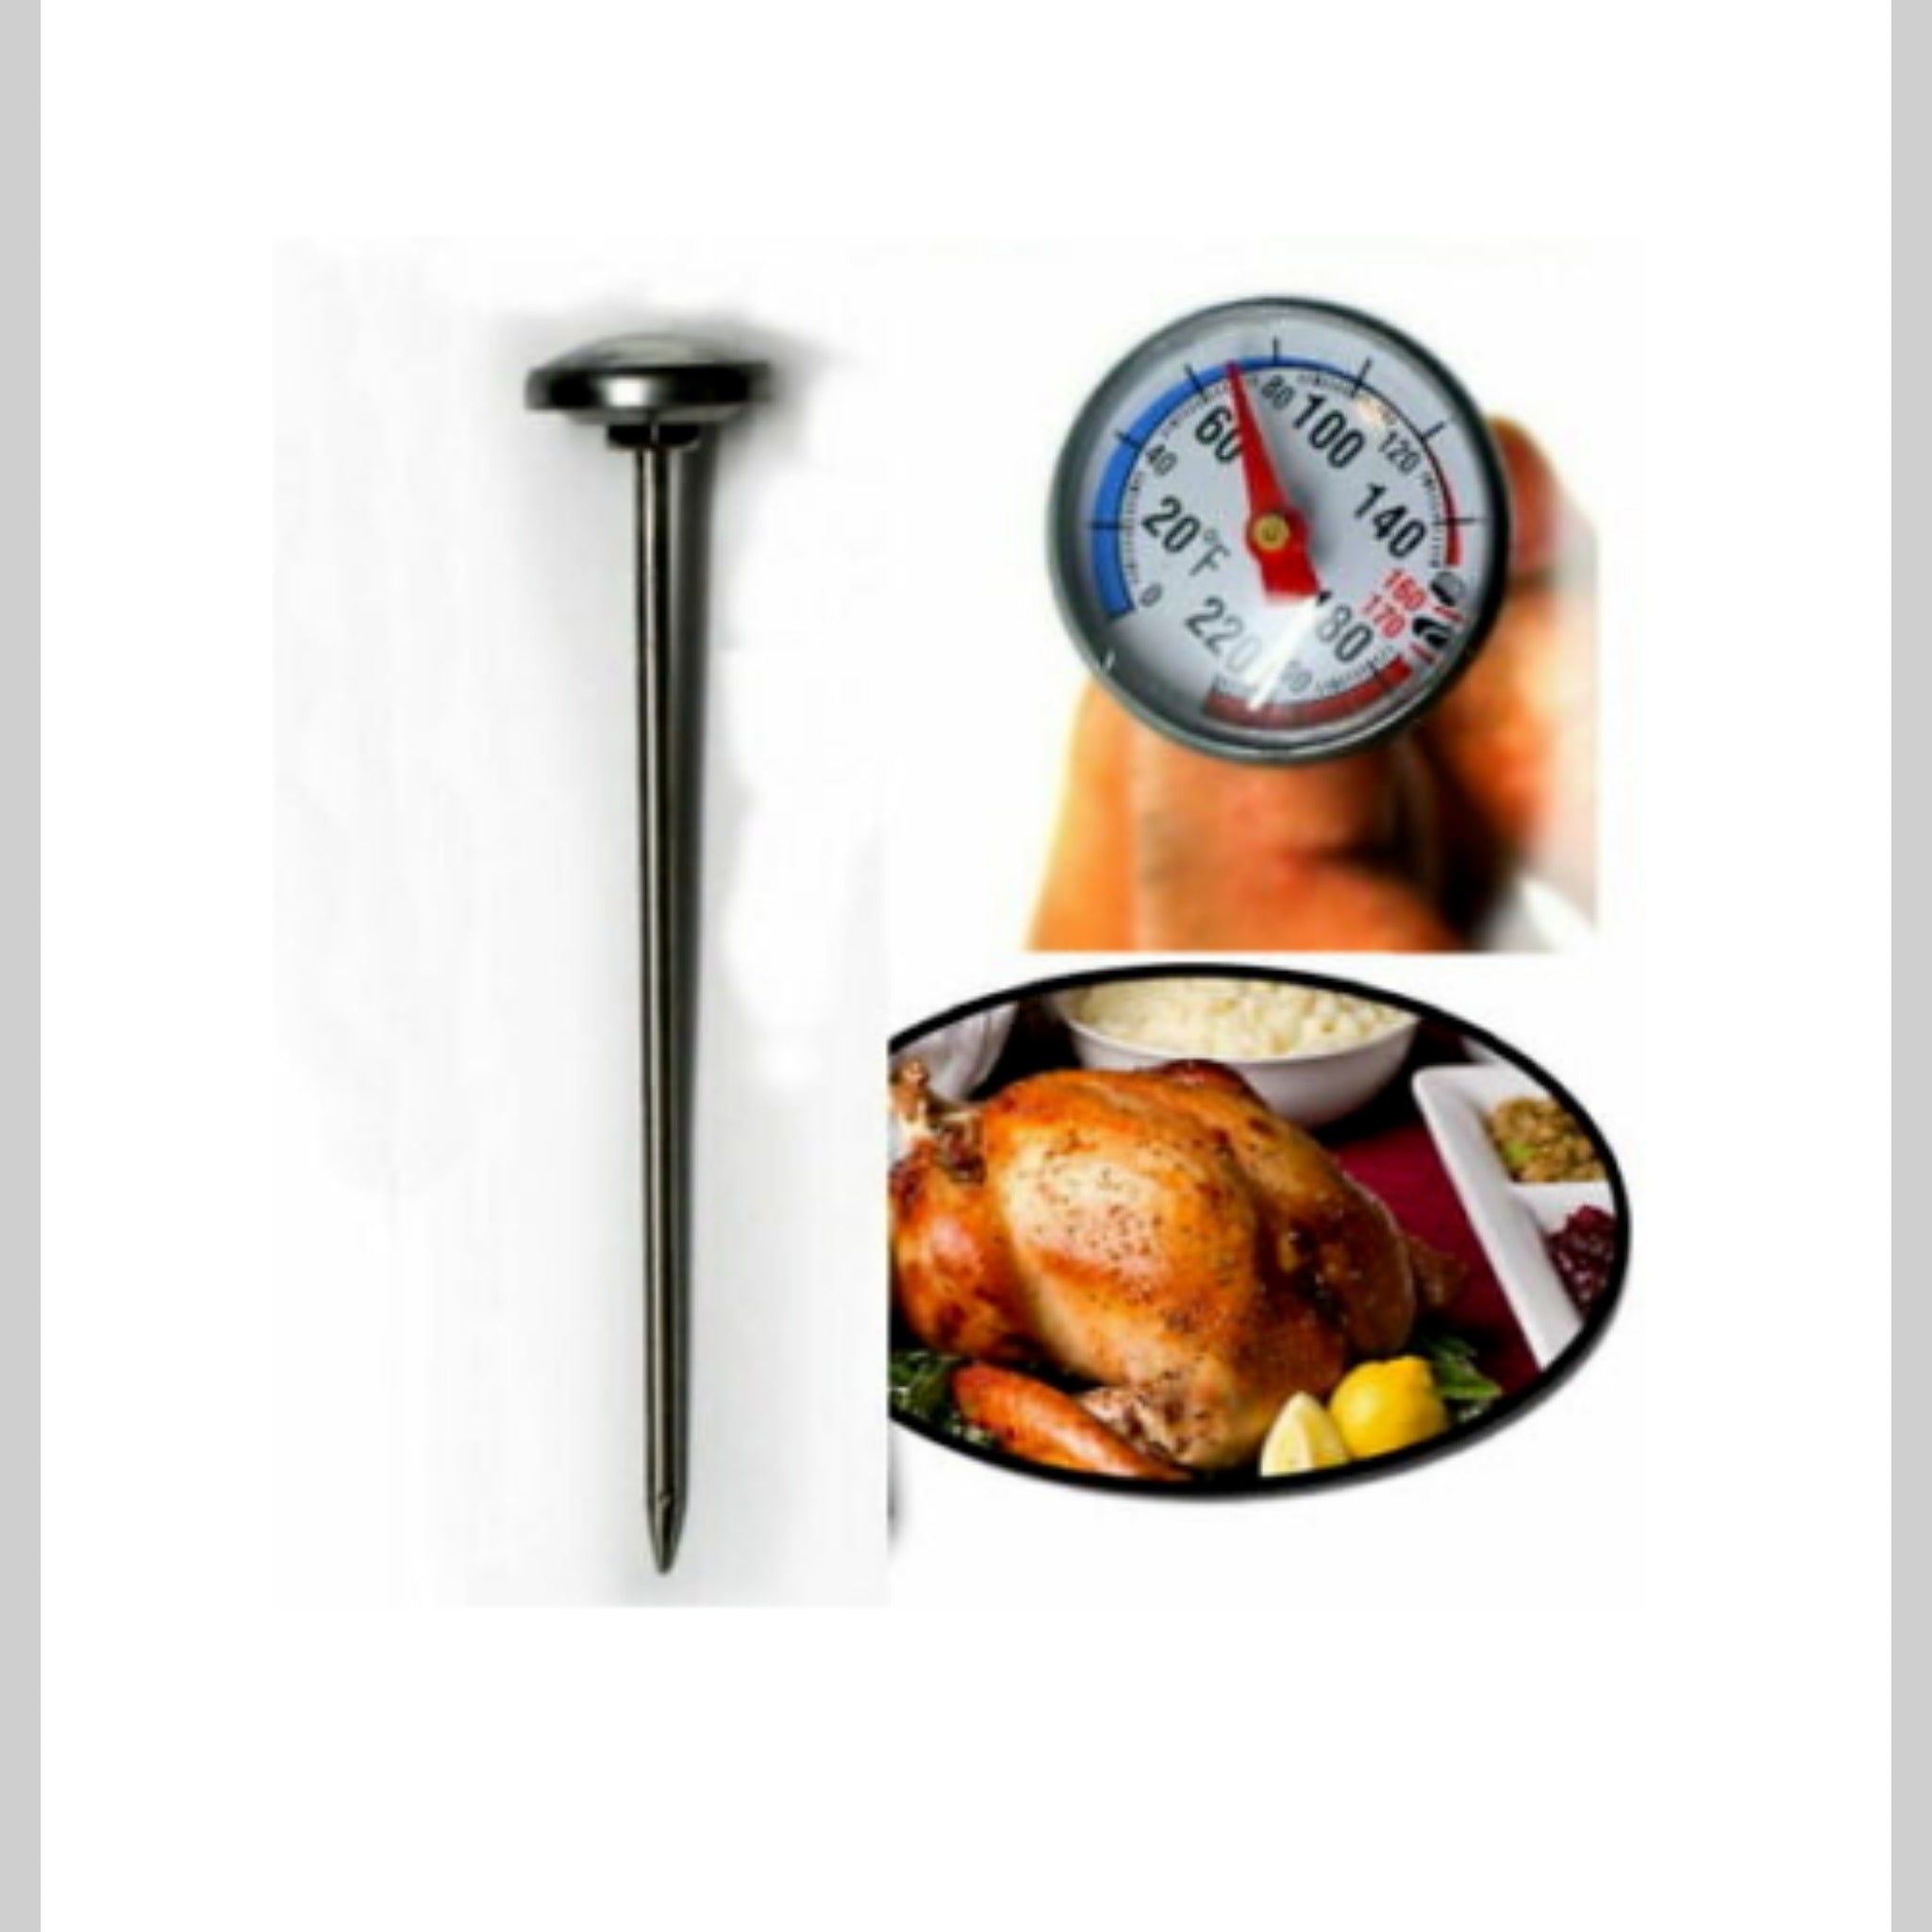 Beclen Harp Meat Thermometer Chicken Turkey Poultry Probe Temperature Cooking Baking Food BBQ Kitchenware